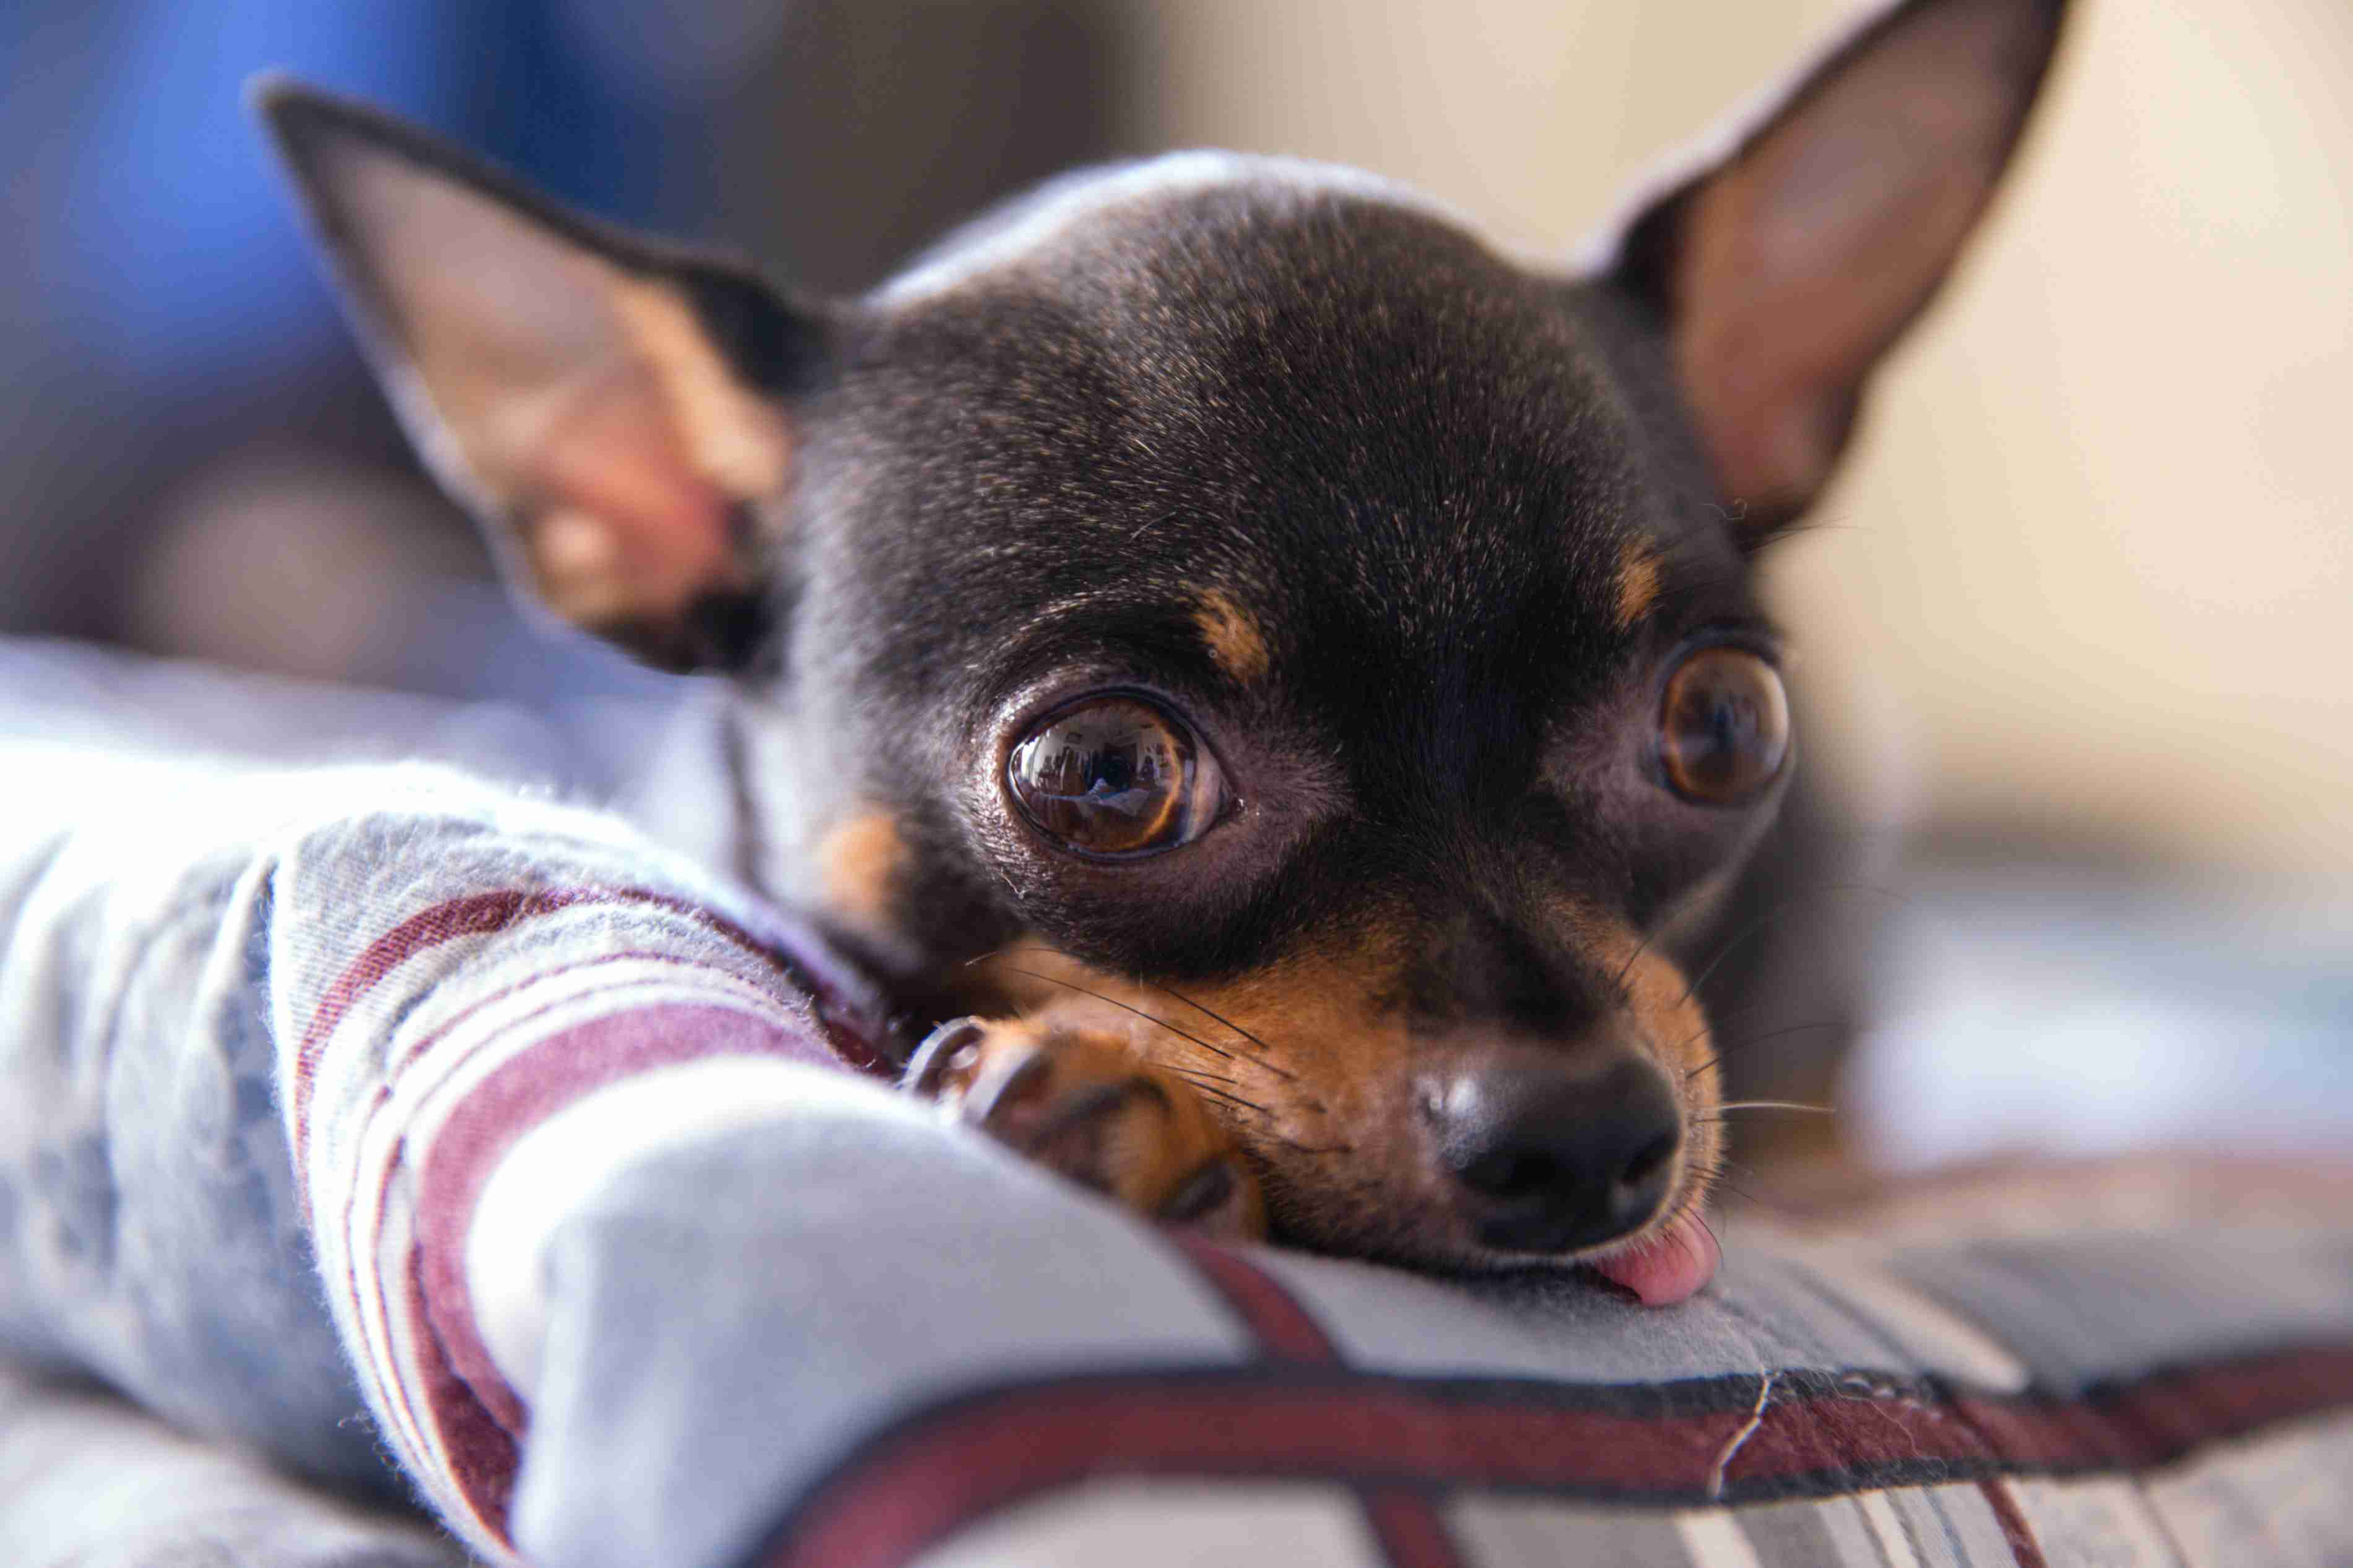 Can Chihuahuas be trained out of their aggressive tendencies?